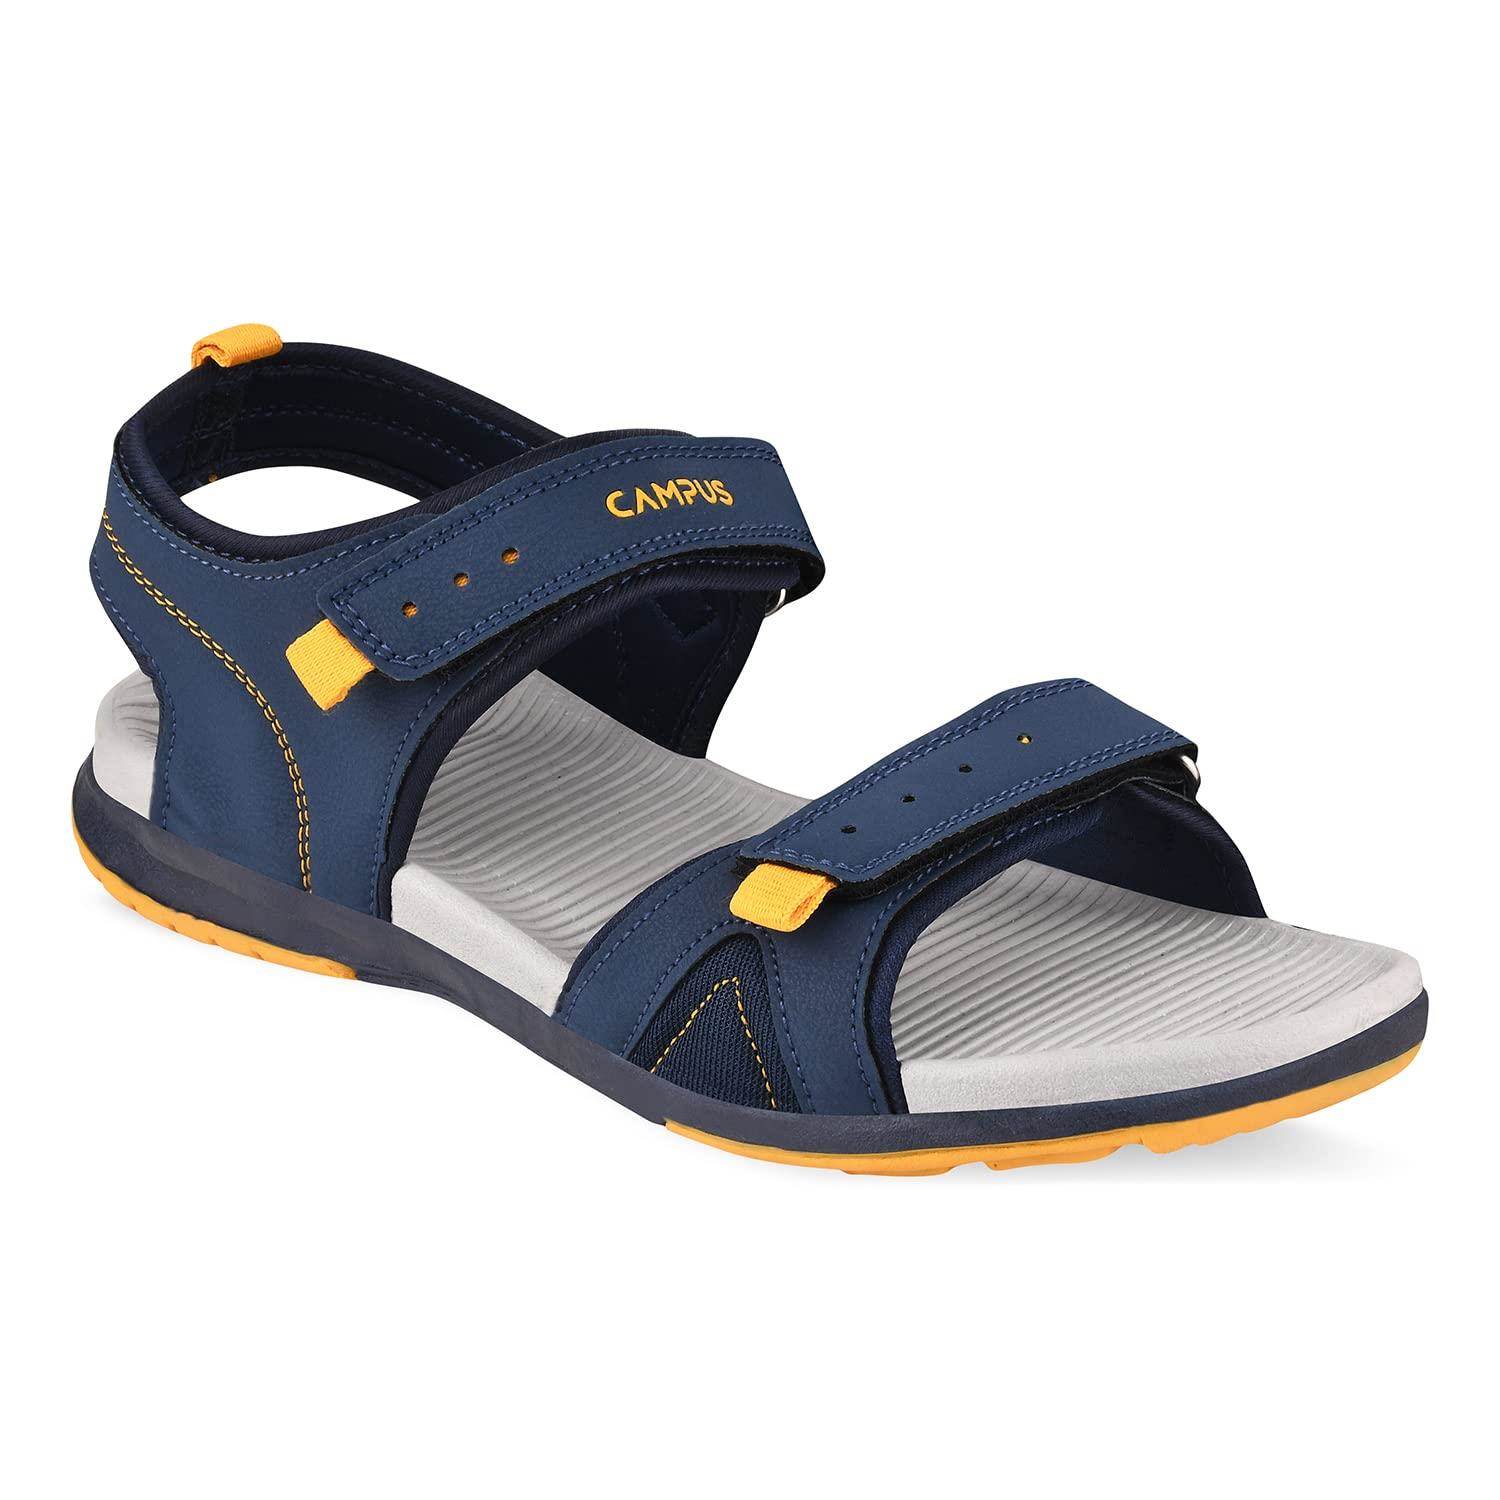 Buy Campus Women's GC-2219L MHRN/BLK Sports Sandals 4-UK/India at Amazon.in